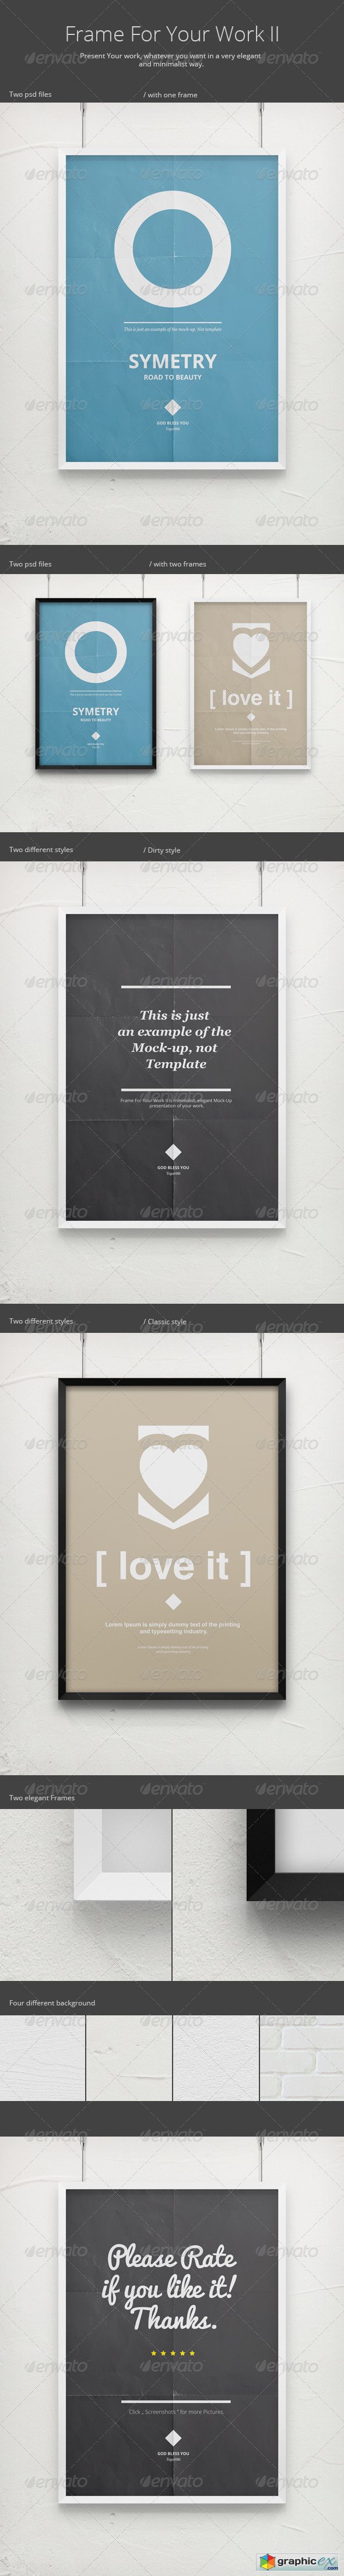 Frame For Your Work II - Poster Mock-Up